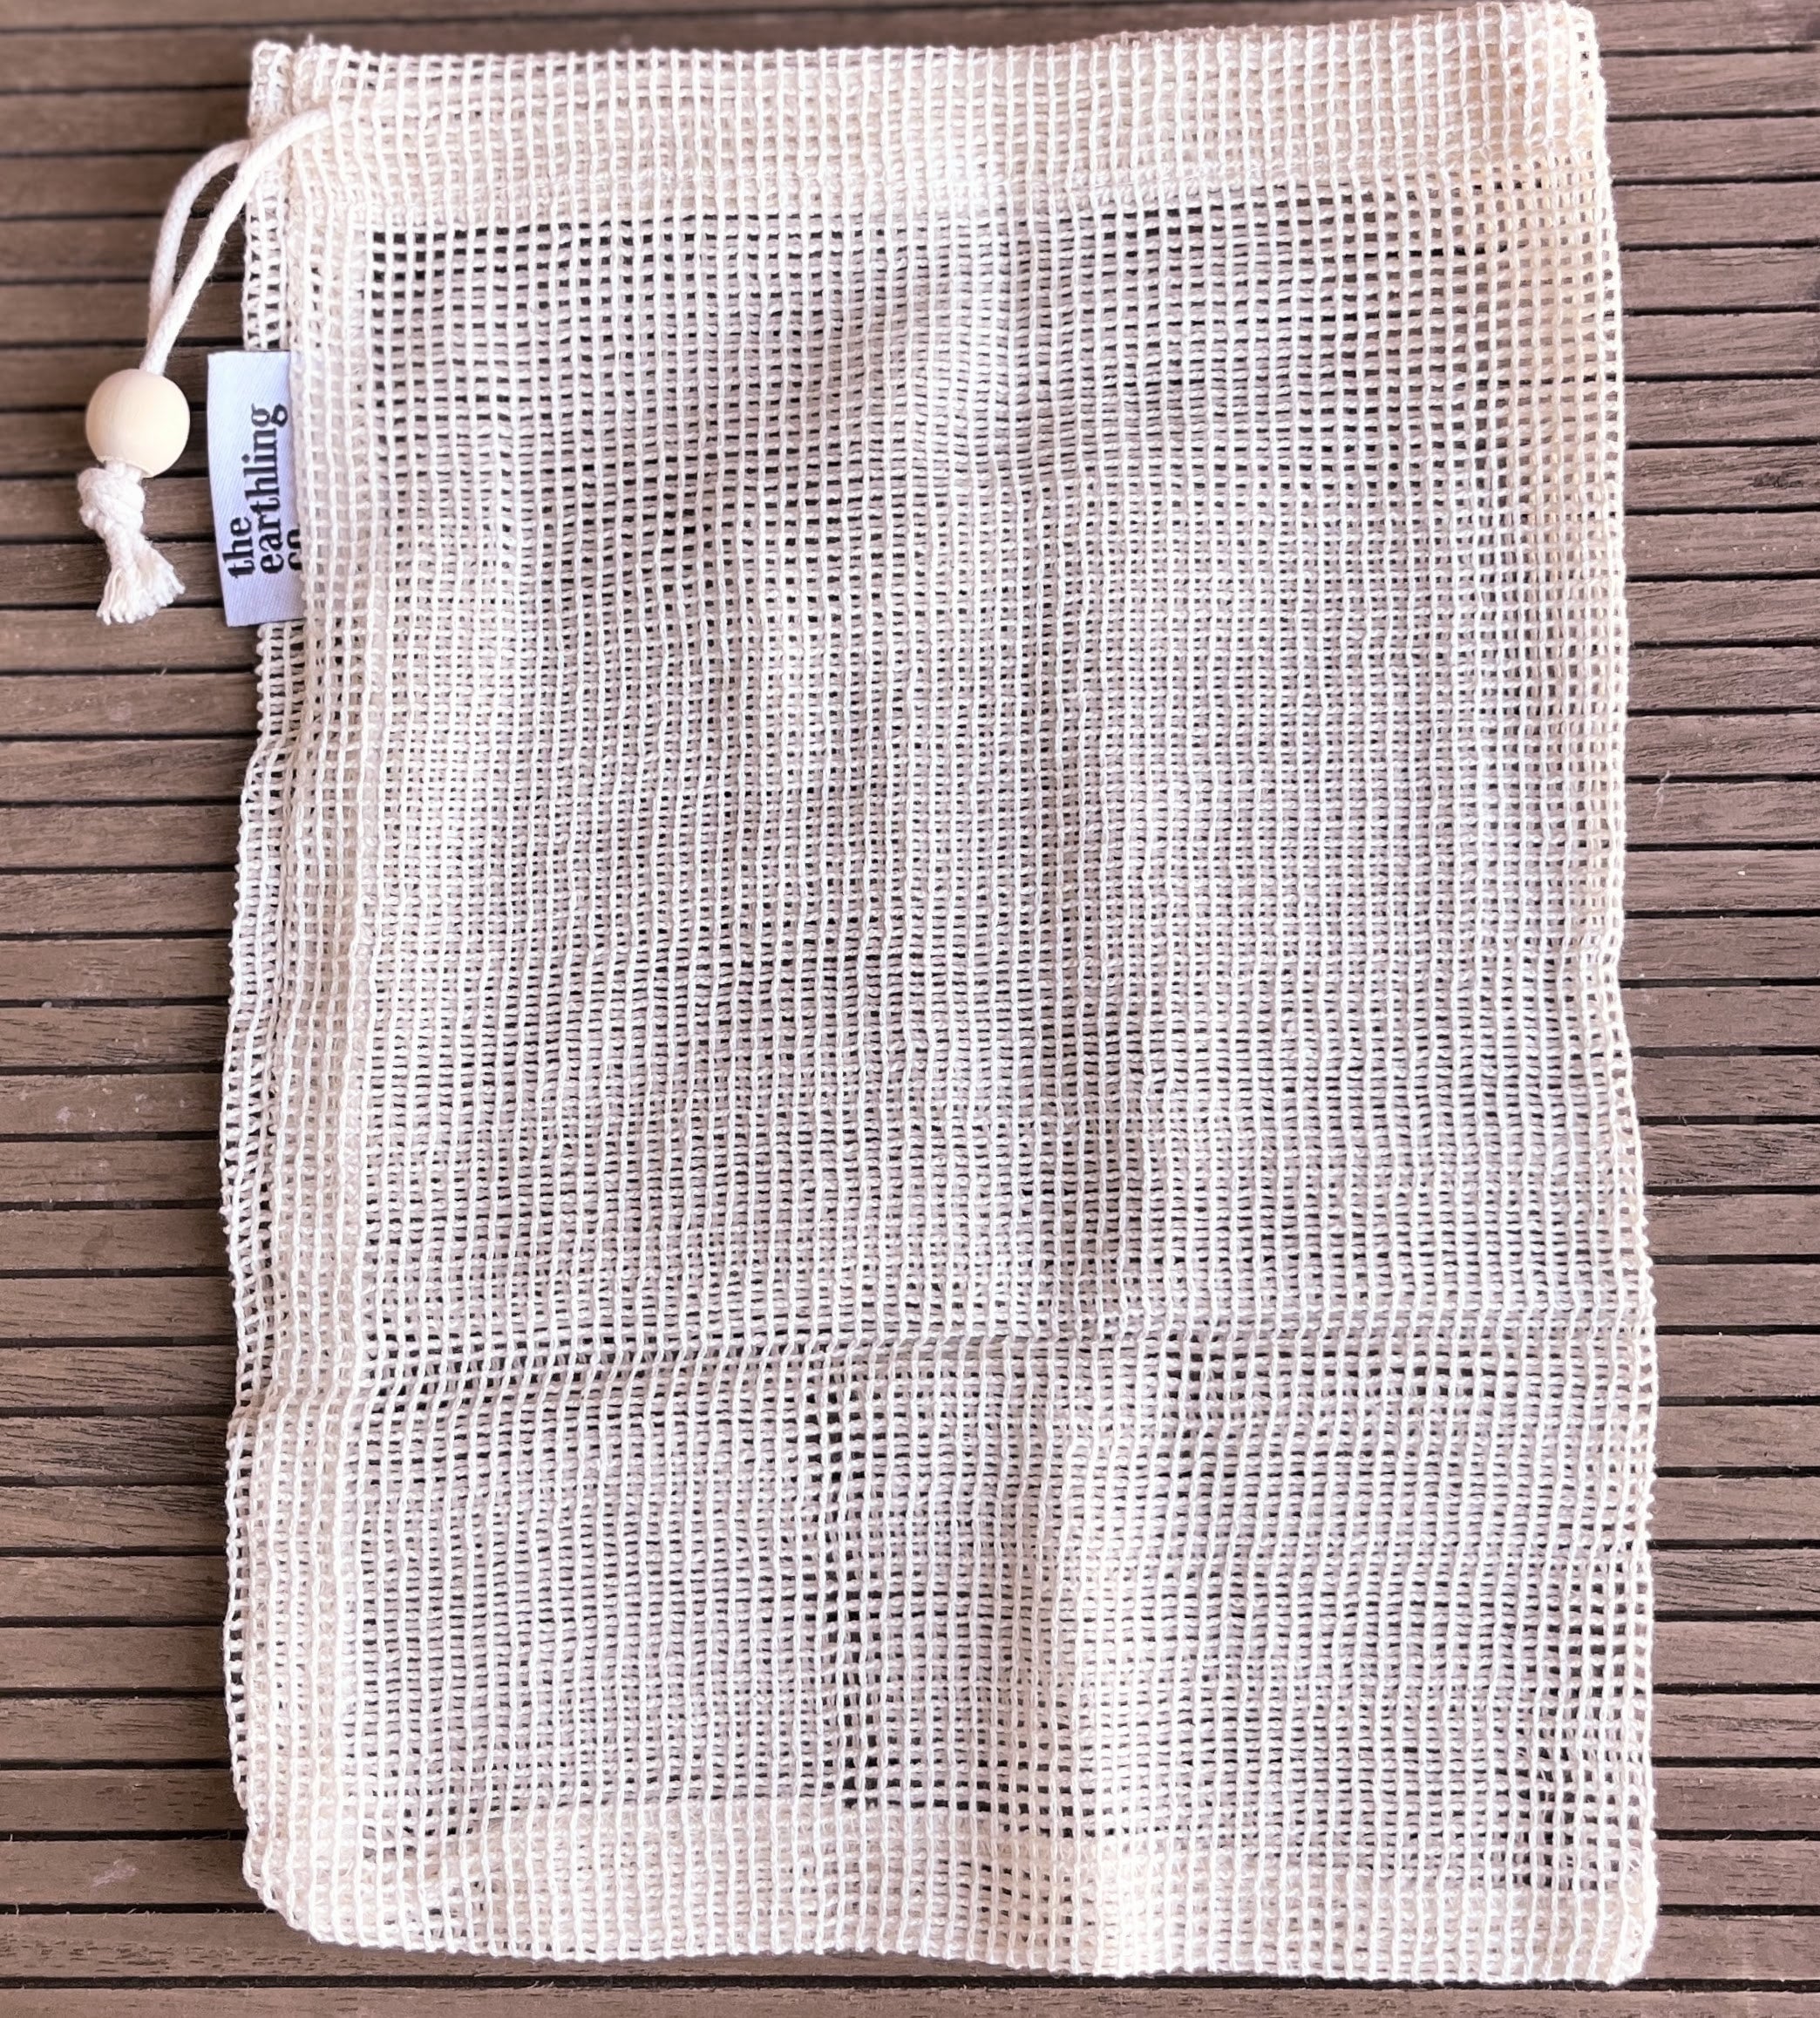 Organic Mesh and Cotton Reusable Produce Bags - Pack of 6